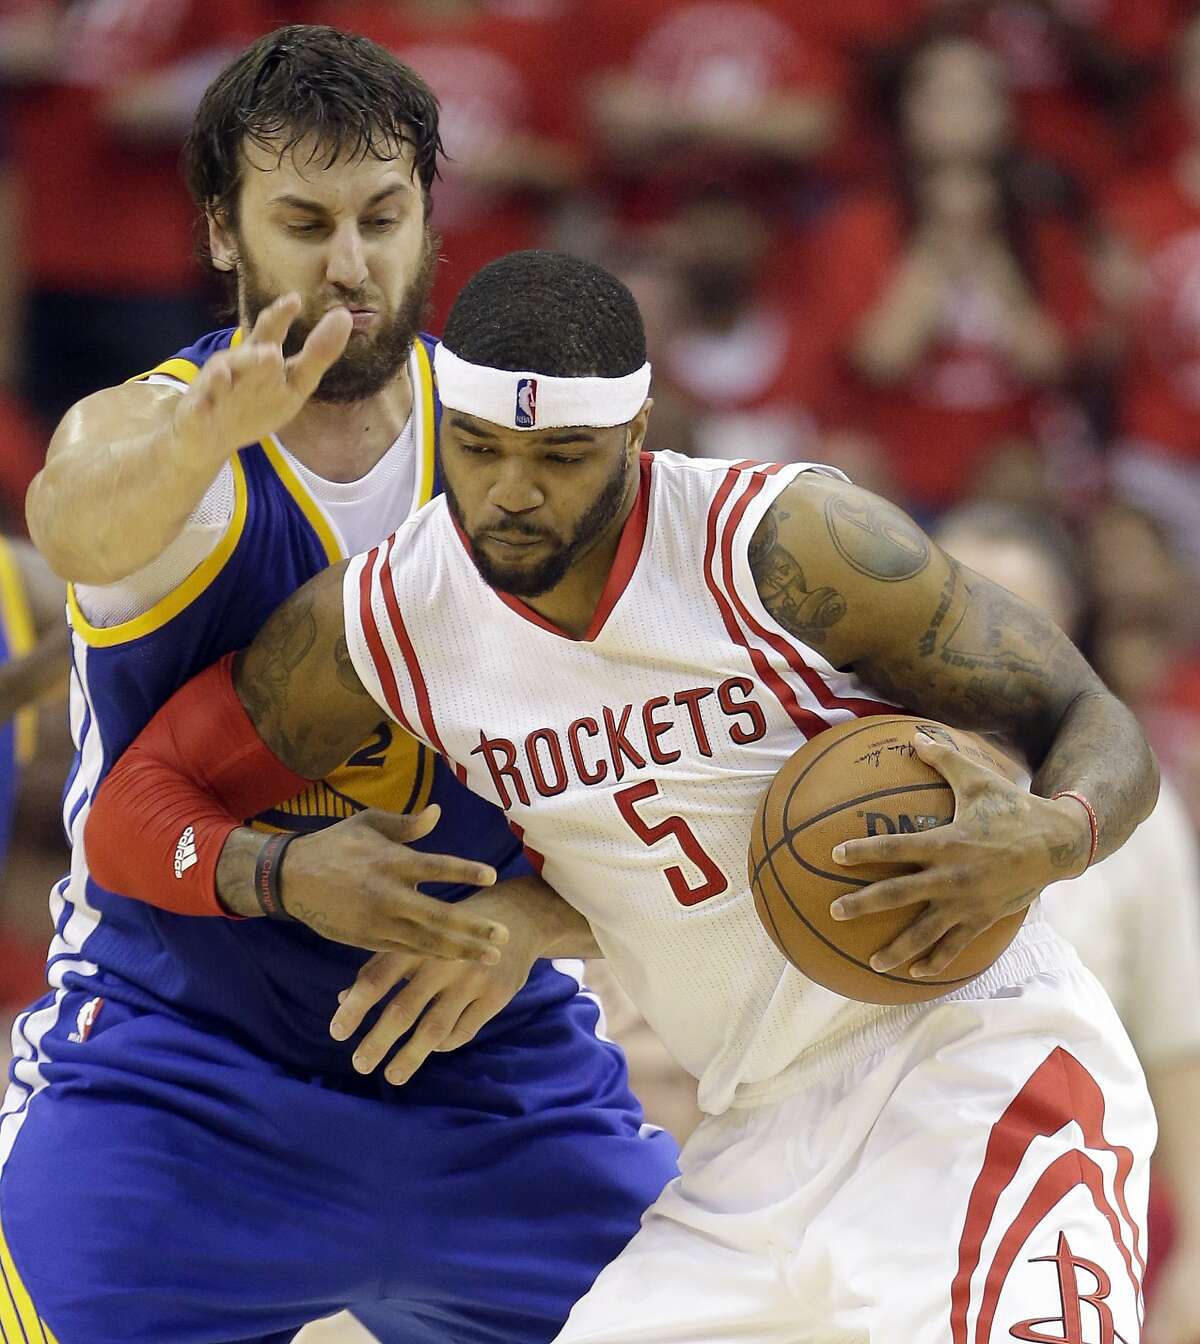 Houston Rockets forward Josh Smith (5) is guarded by Golden State Warriors center Andrew Bogut during the first half in Game 4 of the NBA basketball Western Conference finals Monday, May 25, 2015, in Houston. (AP Photo/David J. Phillip)